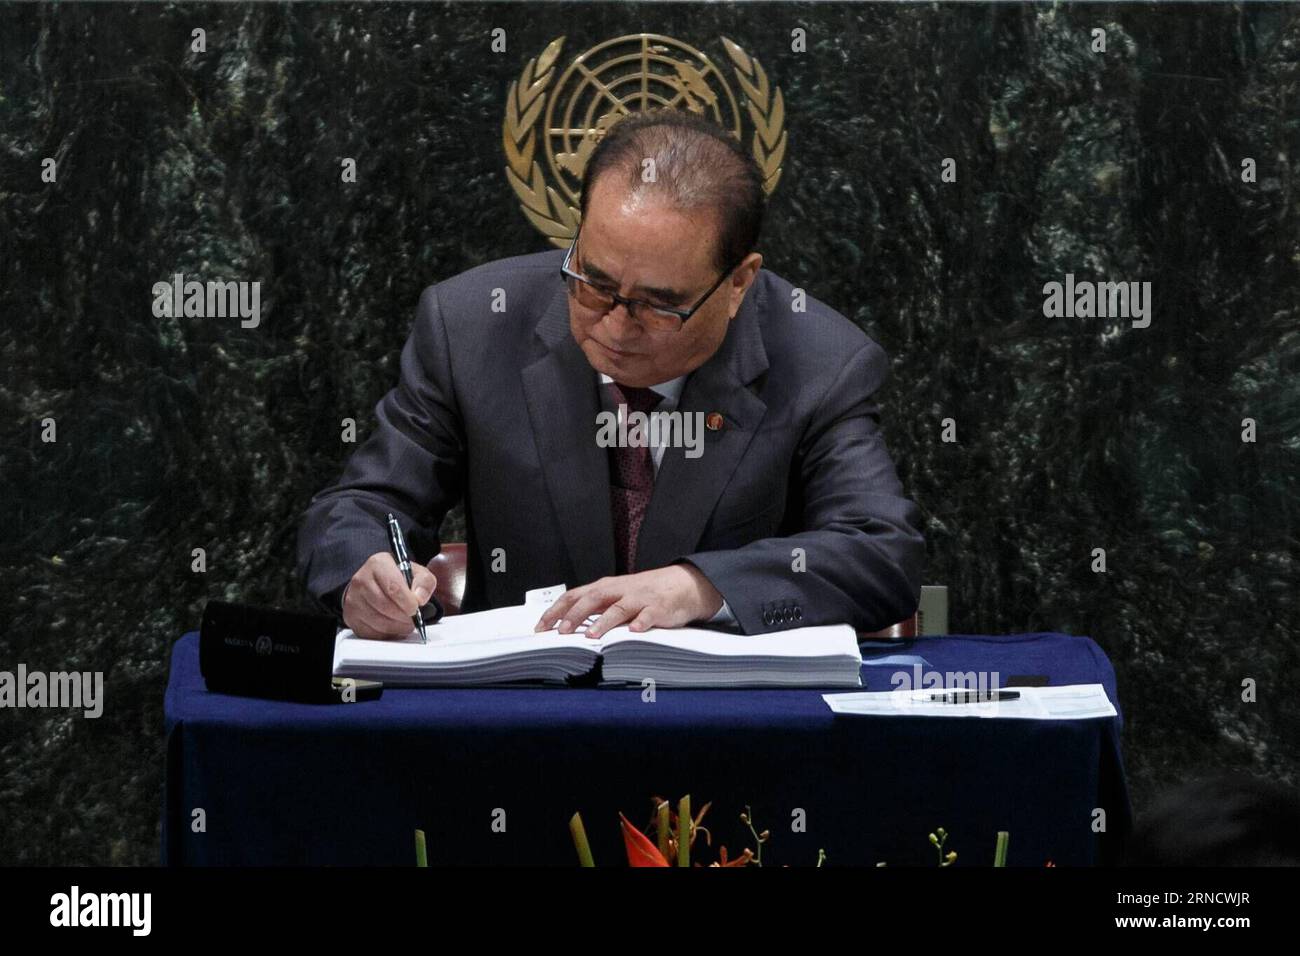 160422 -- UNITED NATIONS, April 22, 2016 -- Ri Su Yong, foreign minister of the Democratic People s Republic of KoreaDPRK signs the Paris climate agreement at the United Nations headquarters in New York, April 22, 2016. The landmark Paris climate pact opened for signatures by leaders from 171 countries Friday morning, marking the first step toward the pact s entry into force.  UN-PARIS AGREEMENT-SIGNING CEREMONY LixMuzi PUBLICATIONxNOTxINxCHN Stock Photo